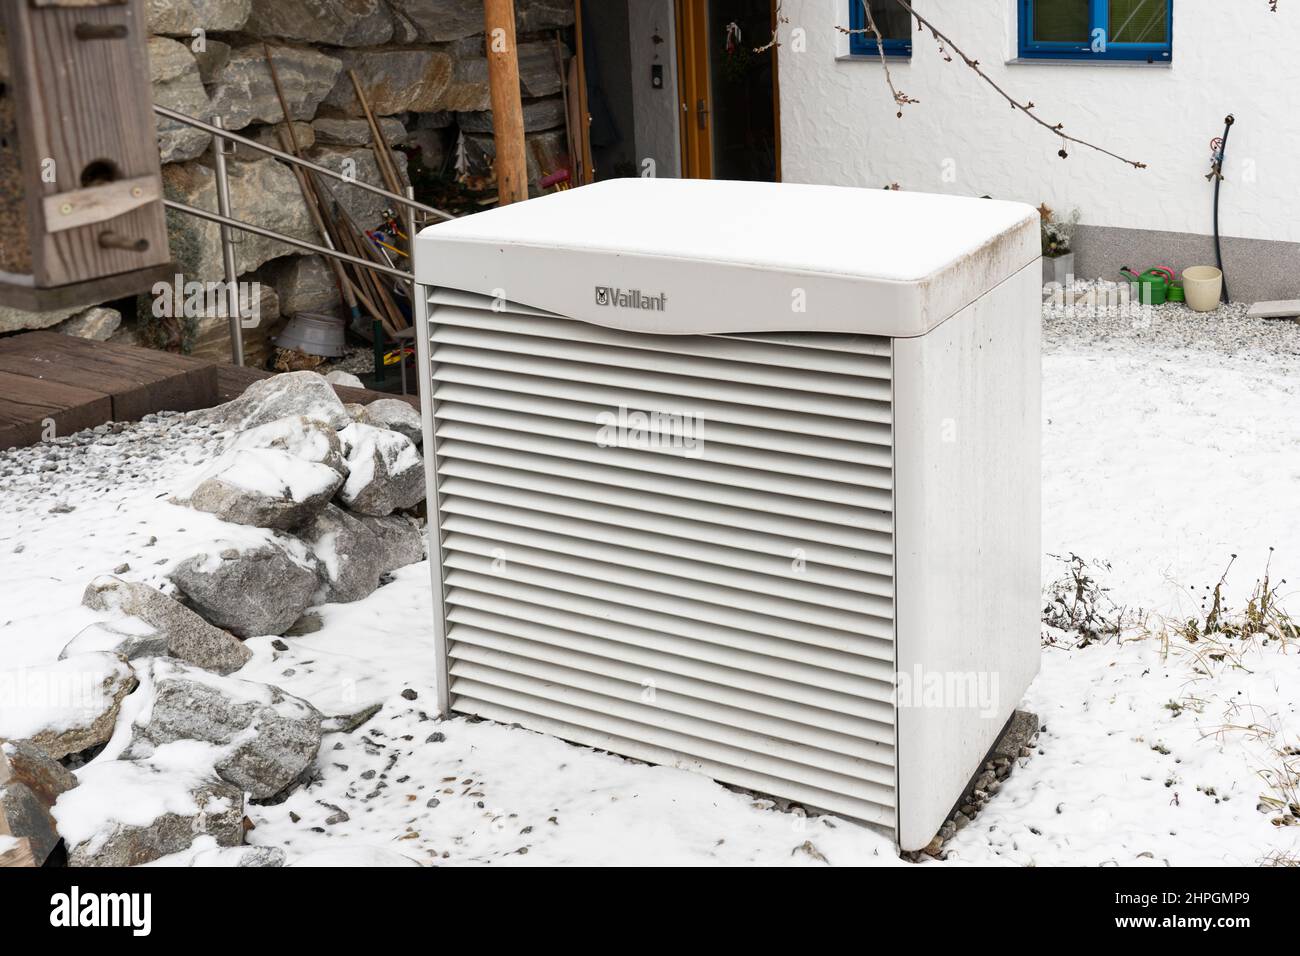 A ground source heat pump, an eco friendly choice of renewable technology, covered in snow during winter in Lower Austria, Austria Stock Photo